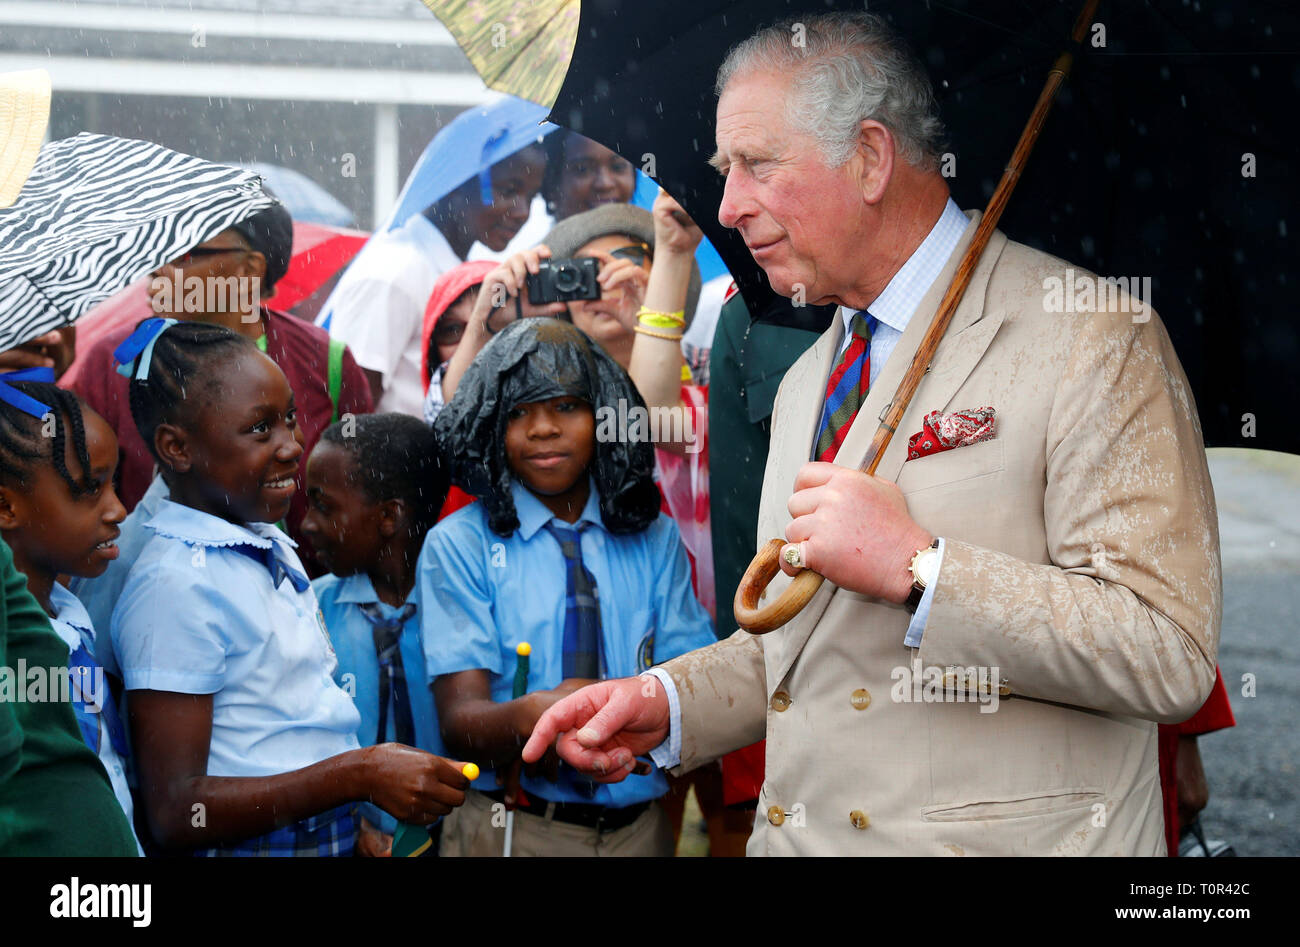 The Prince of Wales visits Brimstone Hill Fortress National Park in St. Kitts and Nevis, a UNESCO World Heritage Site, during a one day visit to the Caribbean island. Stock Photo